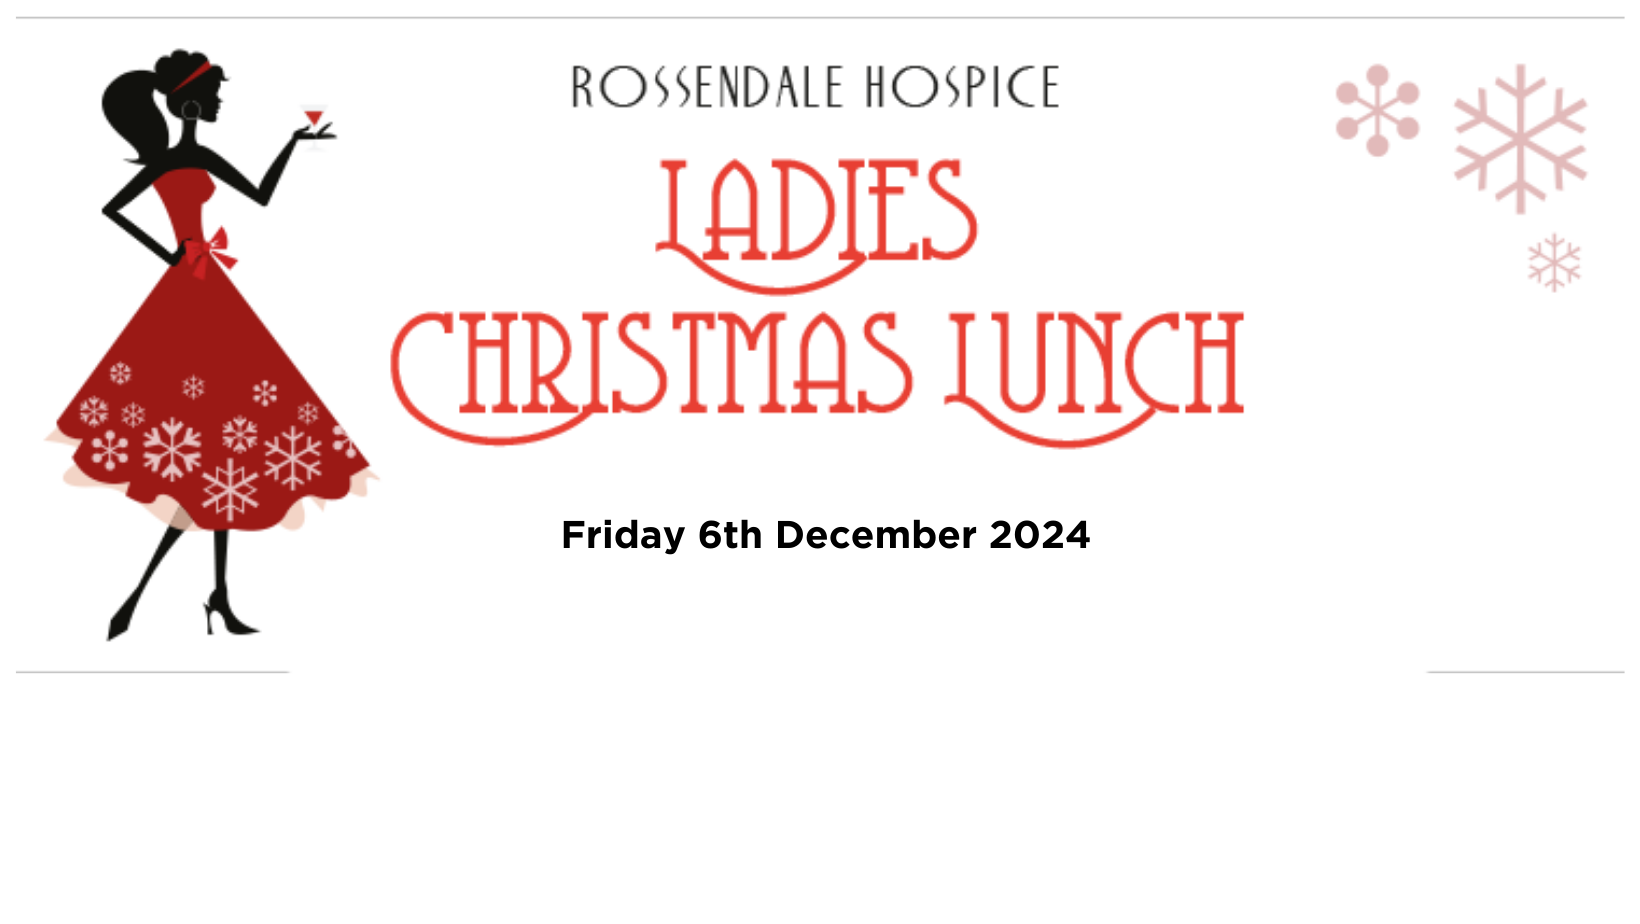 Ladies Christmas Lunch